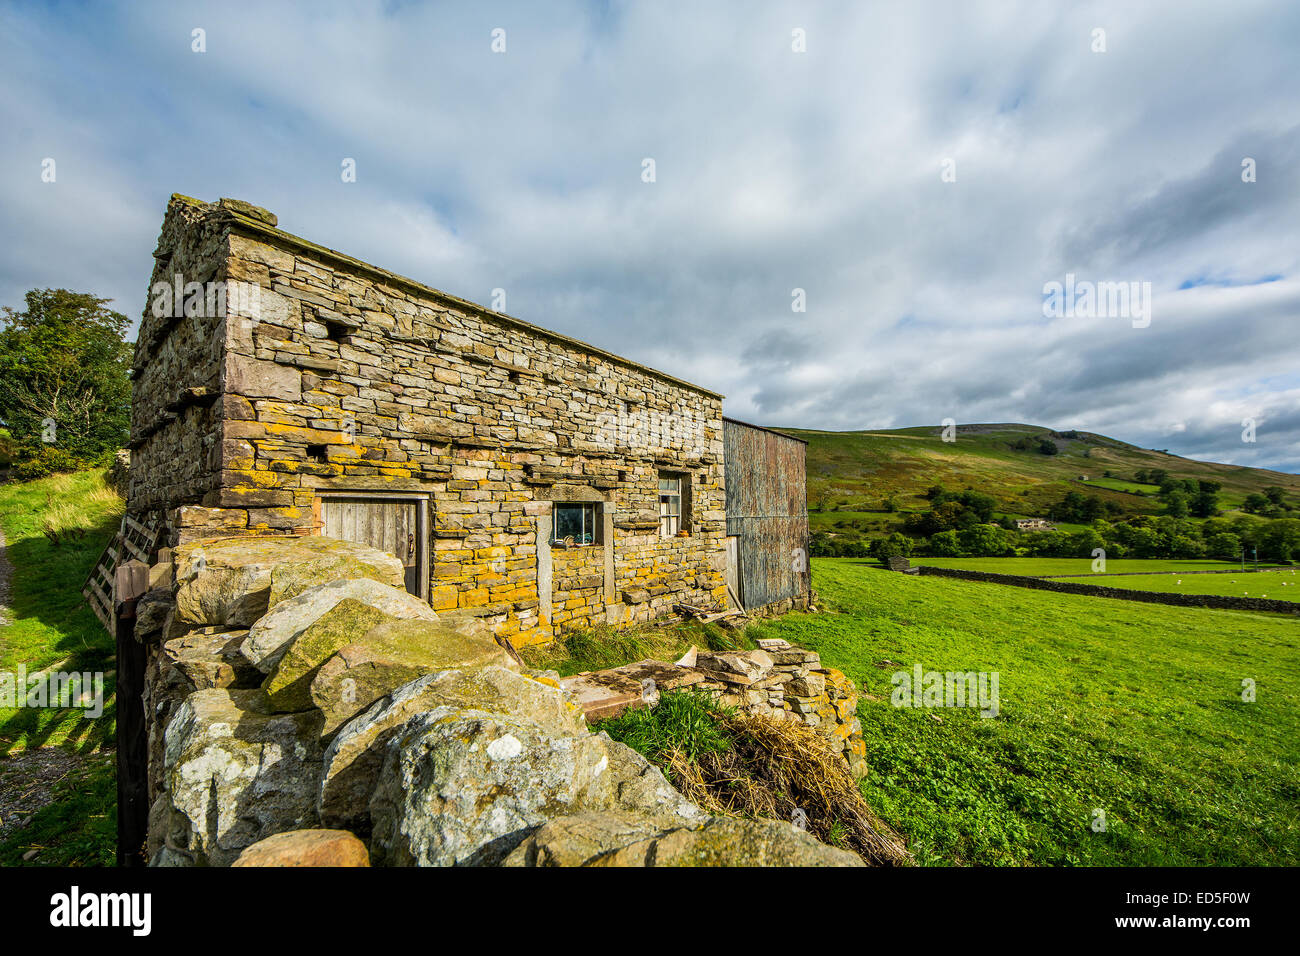 This is a Swaledale barn as seen on the walk from Muker to Keld in the Yorkshire Dales National Park, North Yorkshire. Swaledale Stock Photo